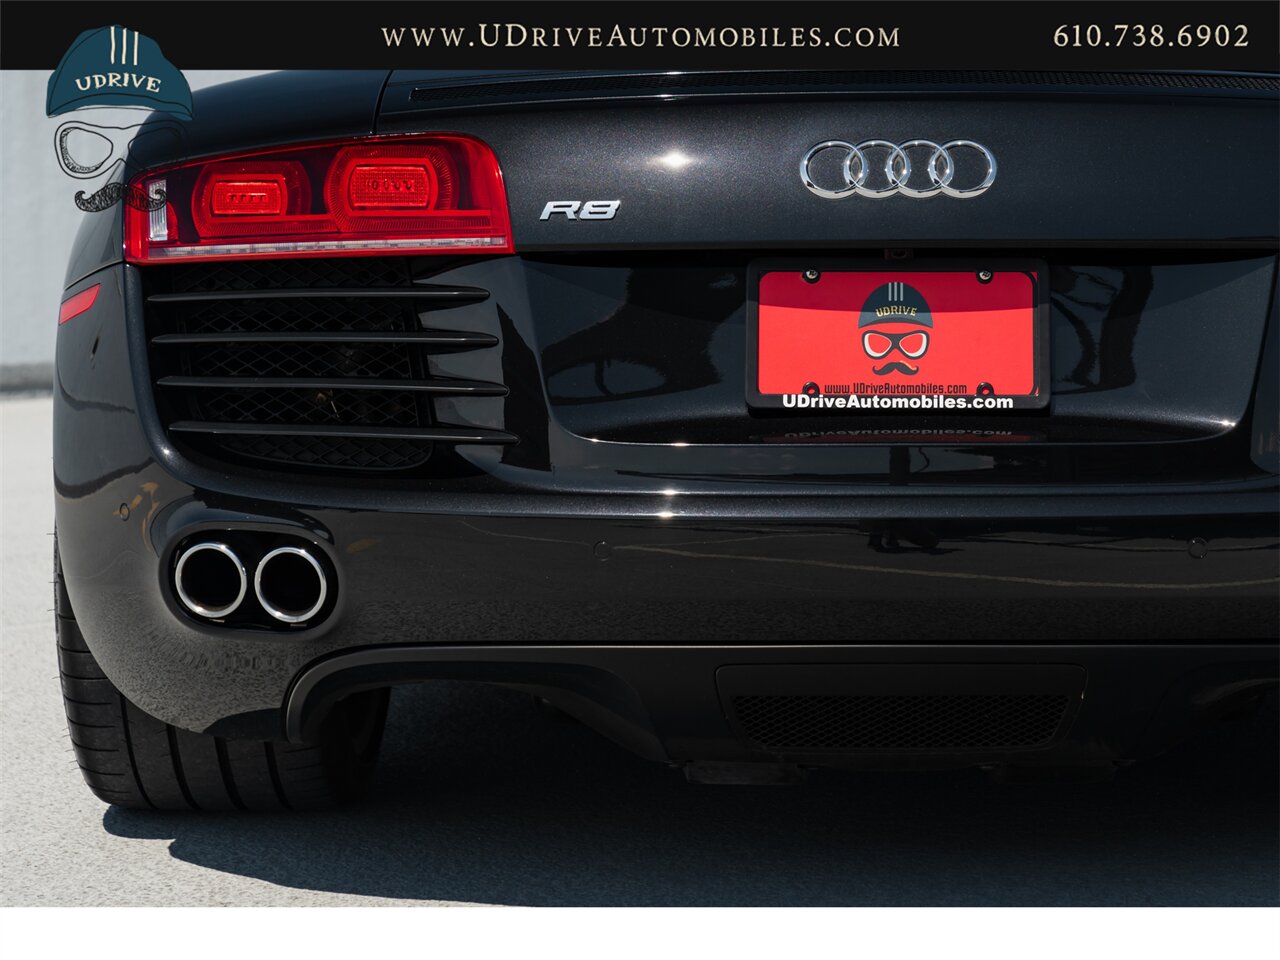 2012 Audi R8 4.2 Quattro  6 Speed Manual 1 Owner Service History - Photo 22 - West Chester, PA 19382